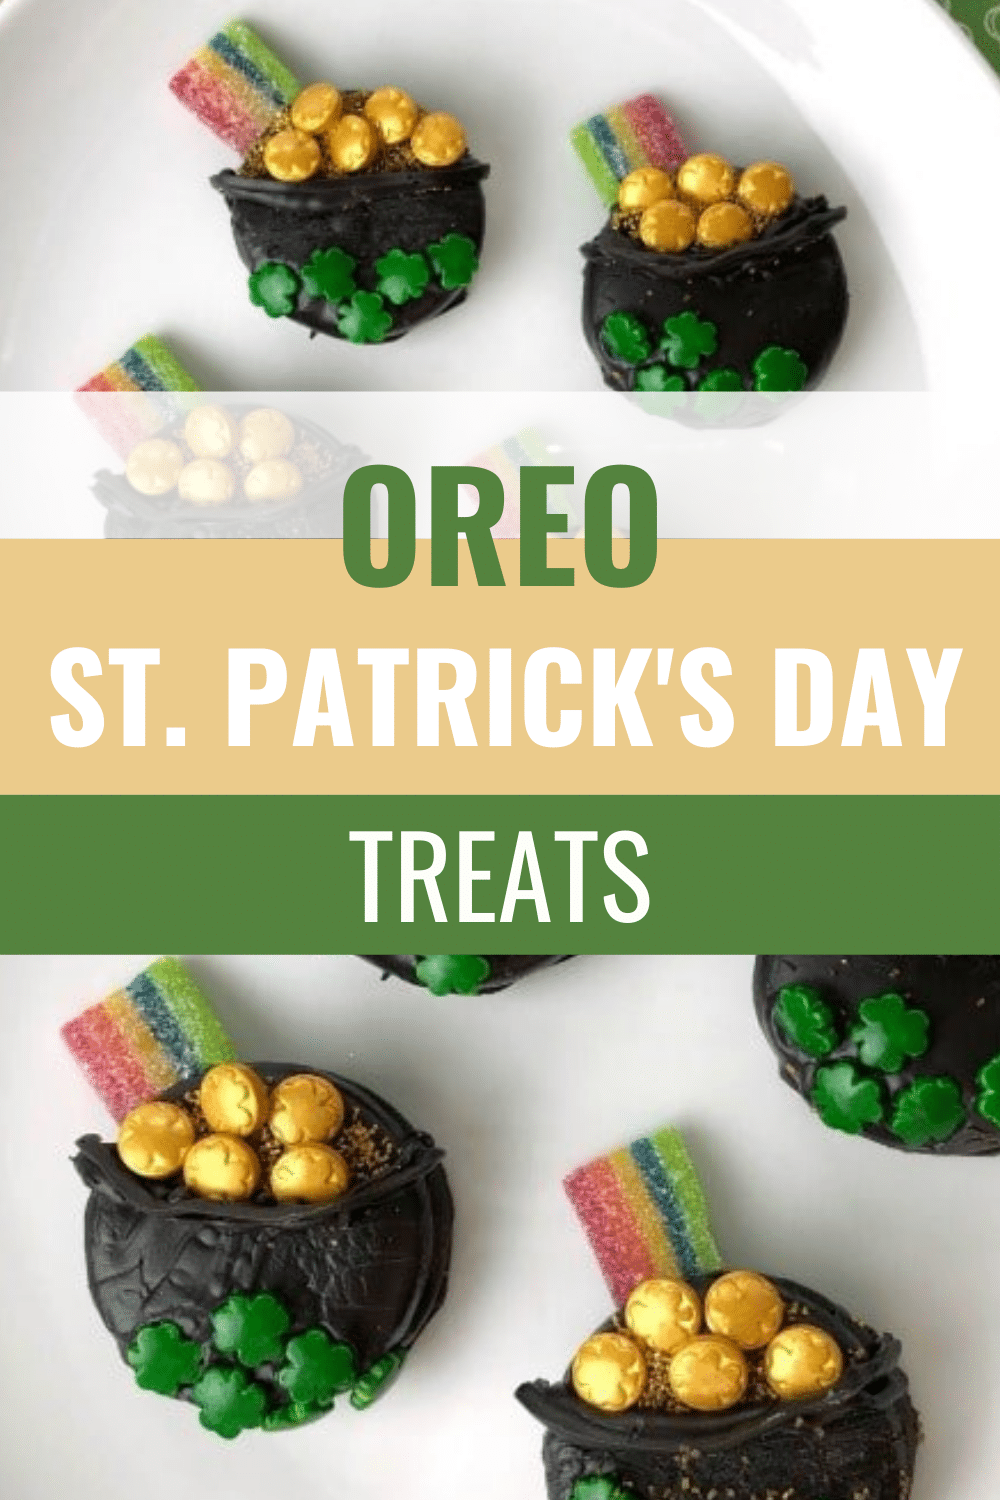 Oreo St. Patrick's Day Treats are cute little pots of gold all made with an Oreo cookie! These adorable festive treats will be the hit of any party. #stpatricksday #oreo #potsofgold via @wondermomwannab